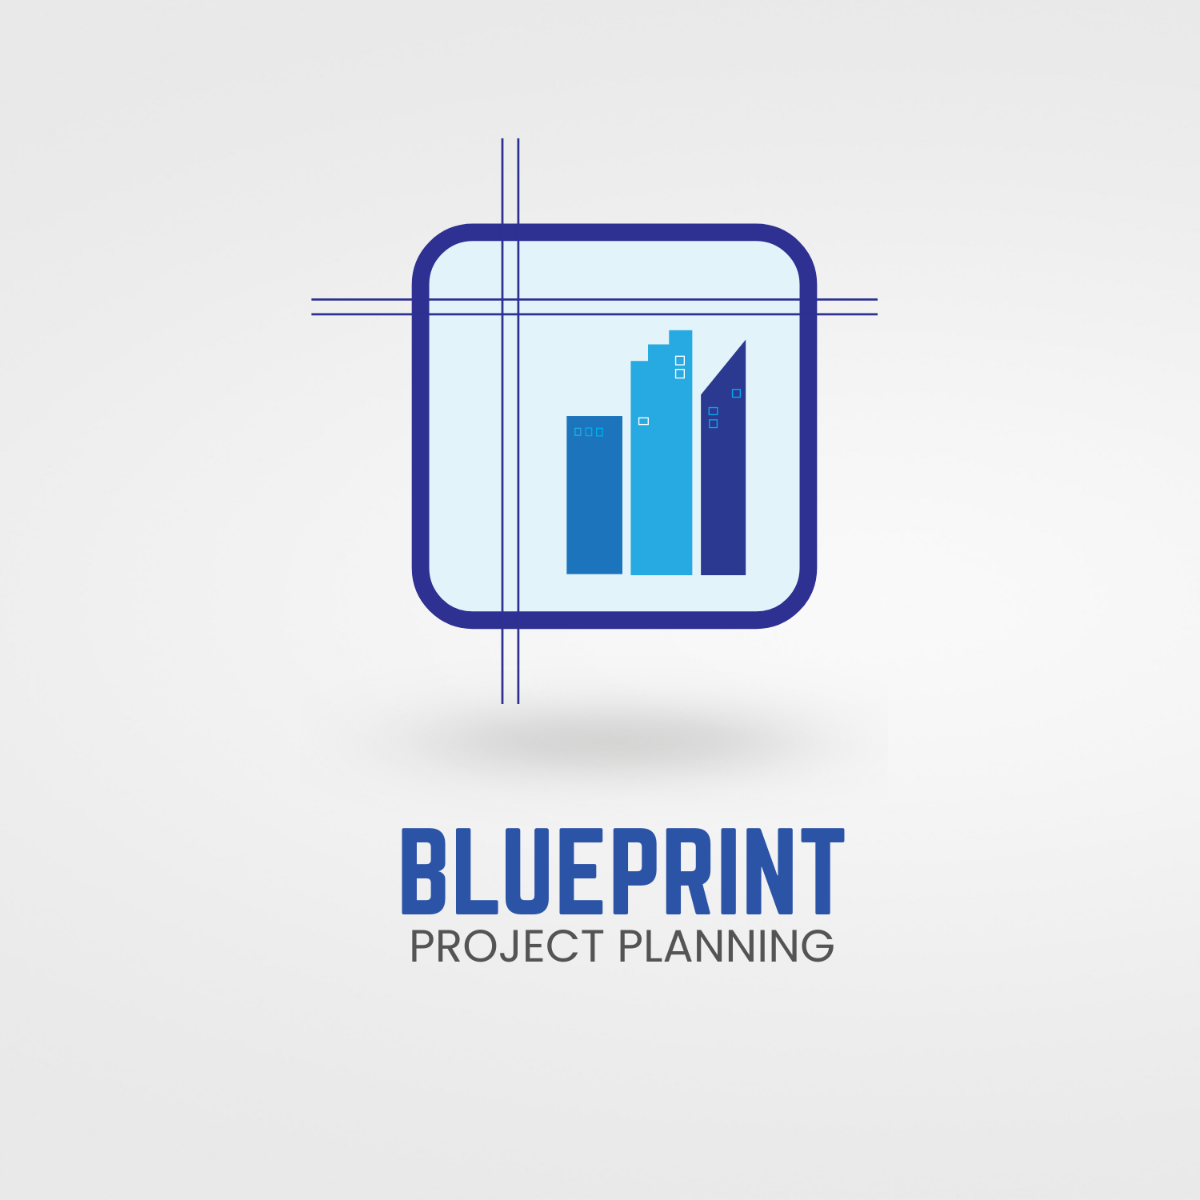 Free Project Planning Blueprint Logo Template